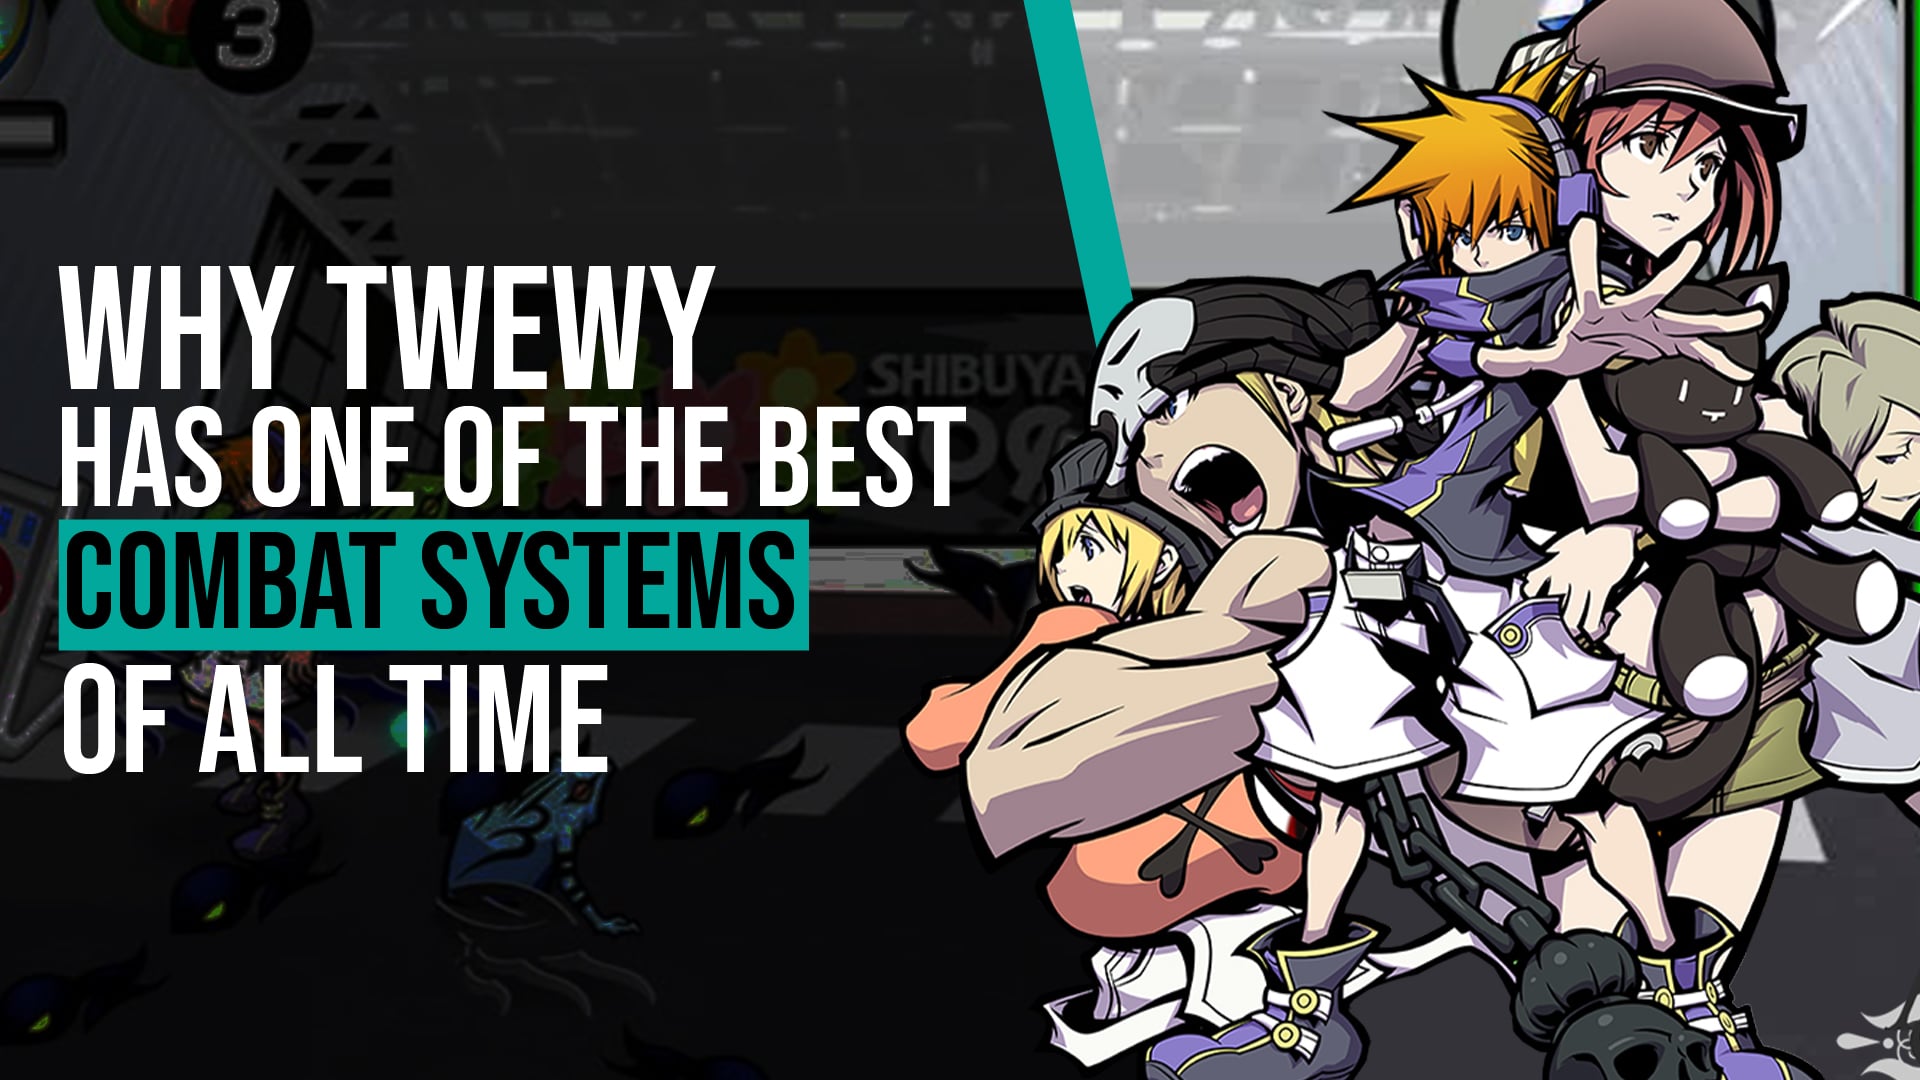 Why The World Ends With You Has One of the Best Combat Systems of All Time